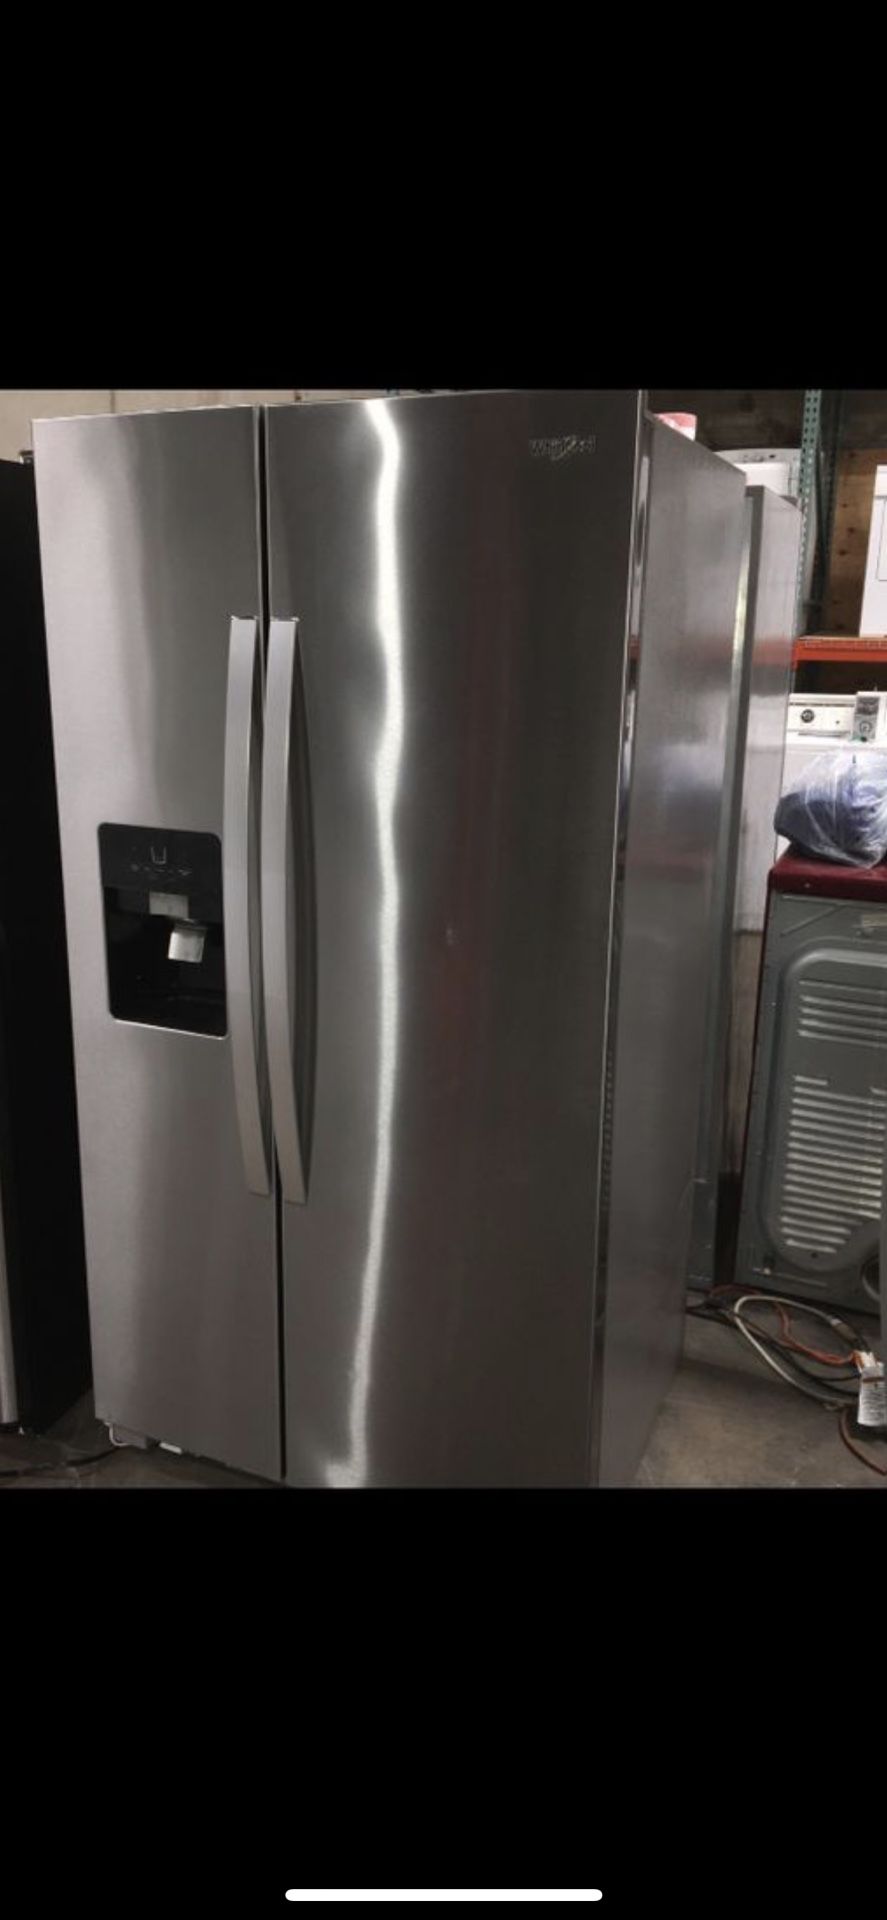 WHIRLPOOL STAINLESS STEEL REFRIGERATOR ICE AND WATER MAKER